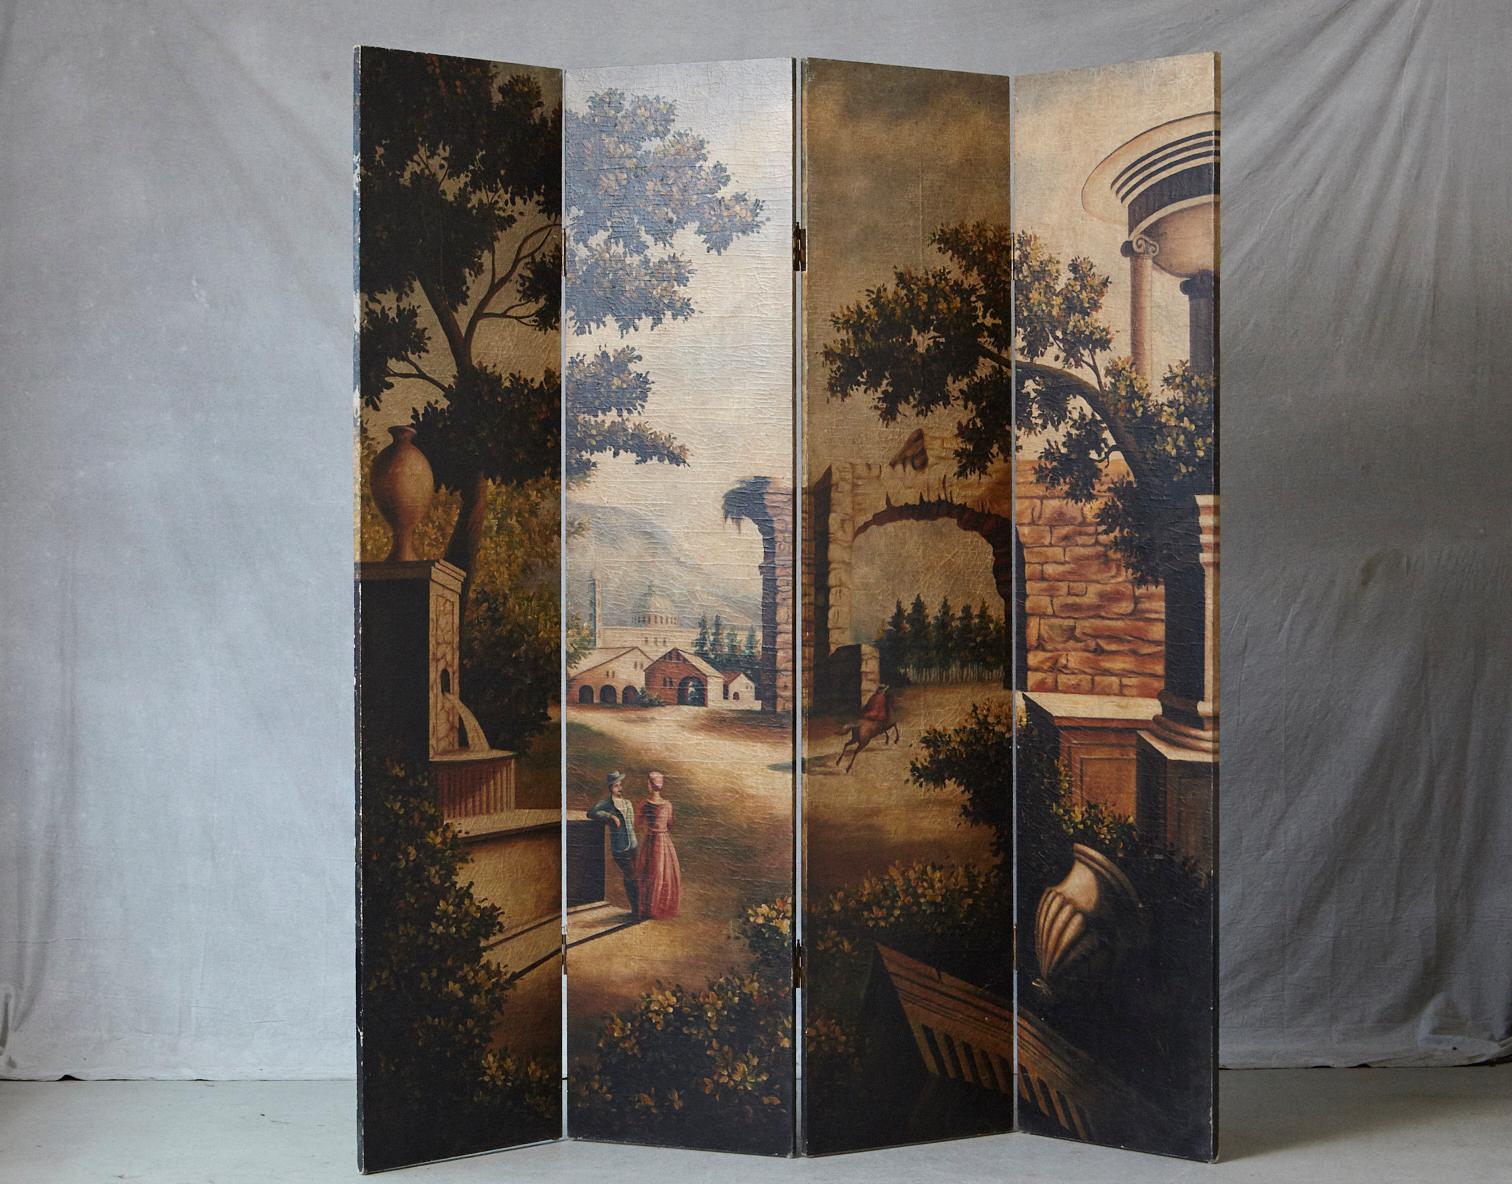 4-panel hand-painted wood screen featuring a landscape with a variation of architectural motifs on an antiqued crackled background. The back has a stucco plaster like painted finish. The screen is from Decorative Crafts, circa 1980s.
Each panel